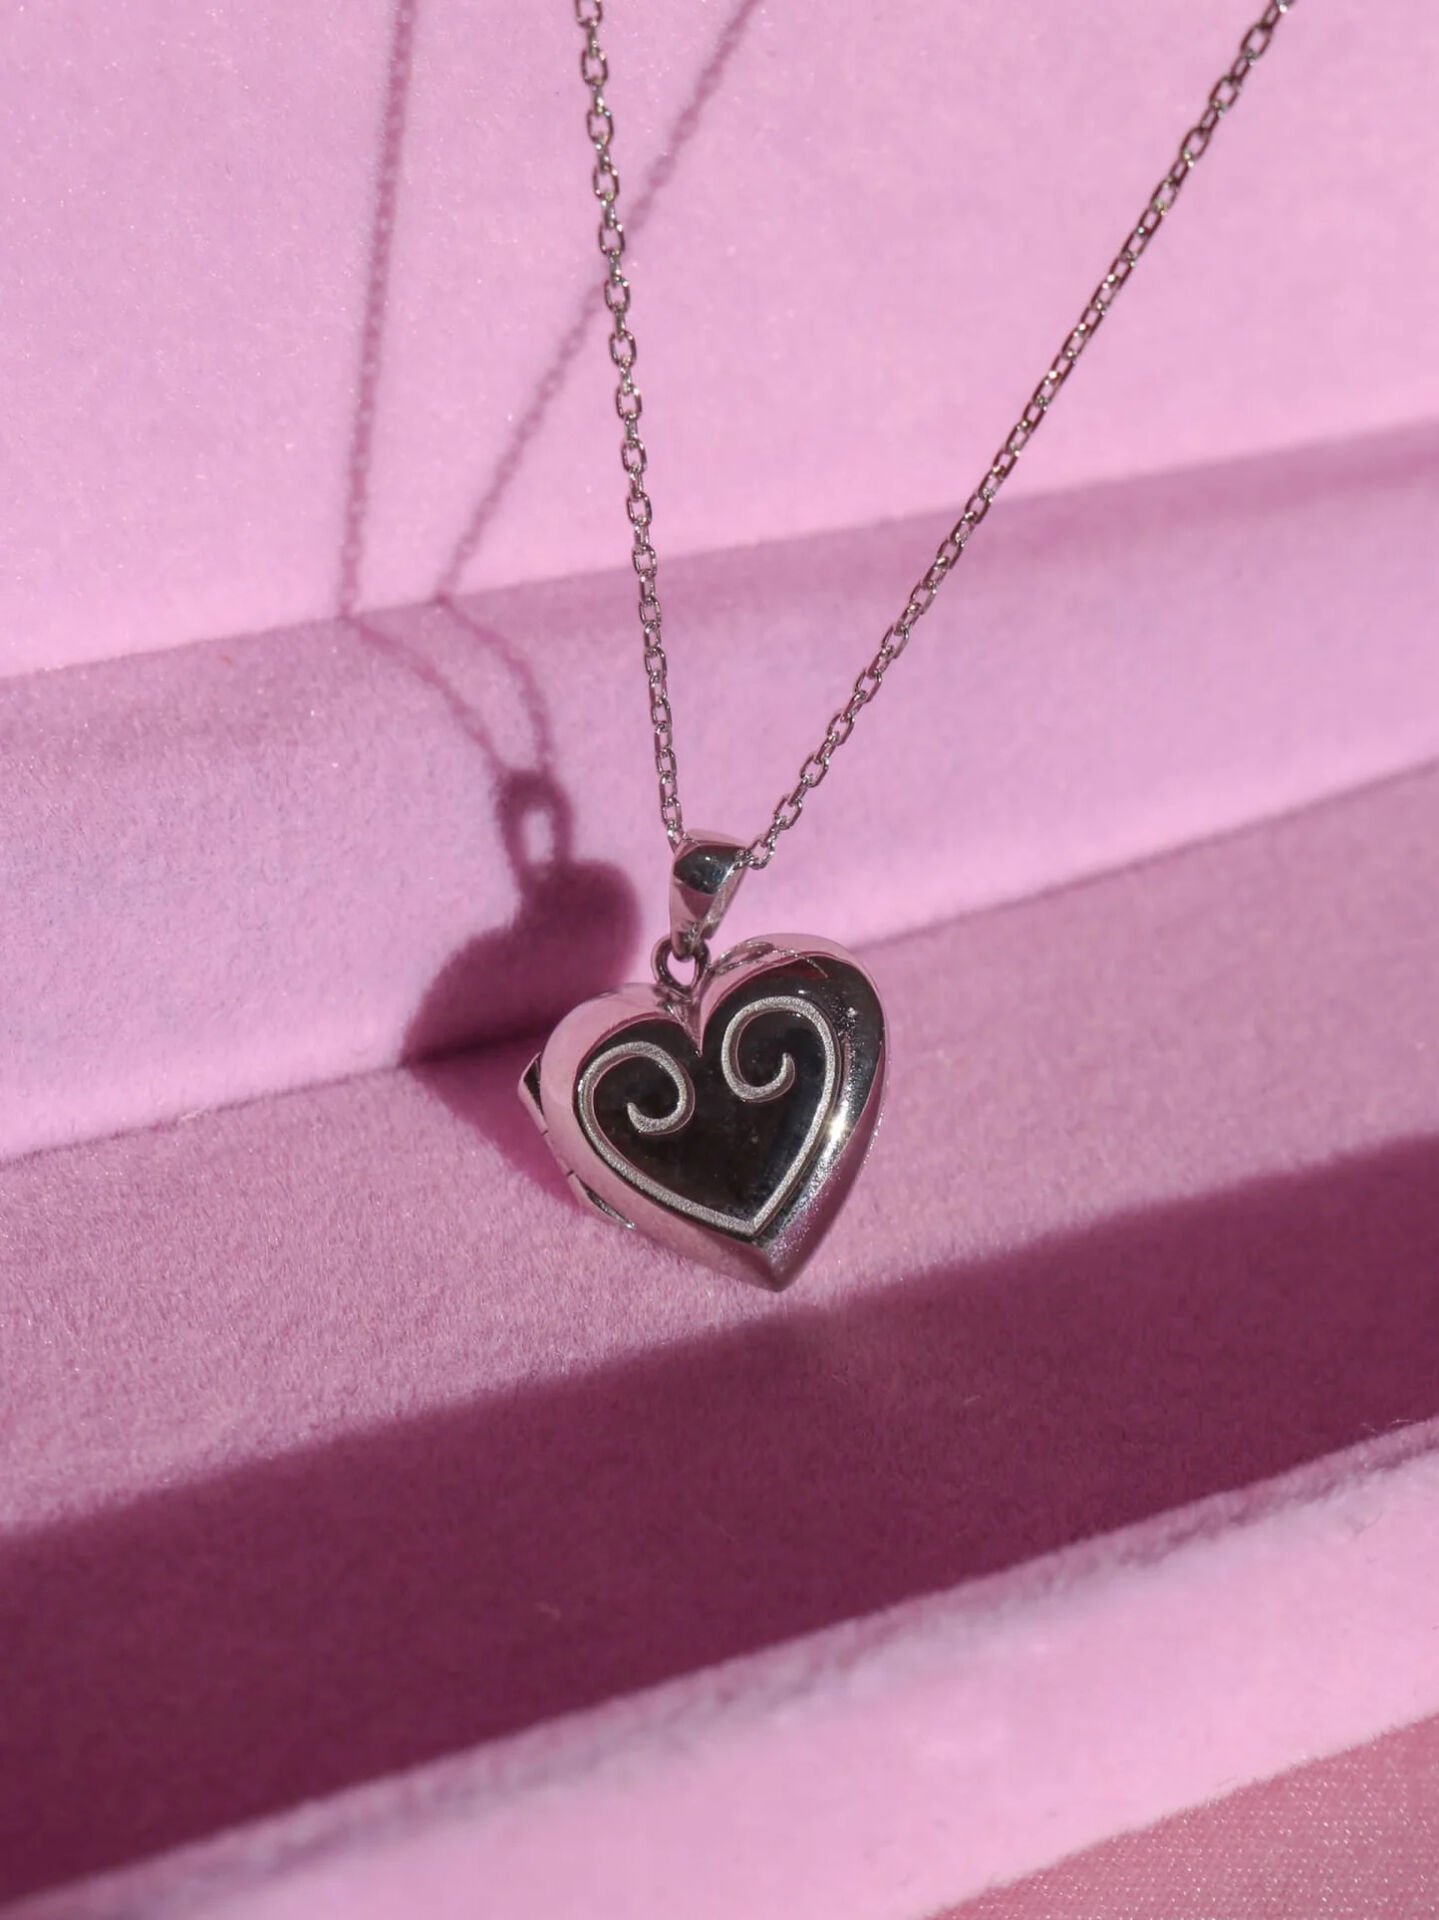 Clara 925 Sterling Silver Heart Pendant Chain Necklace